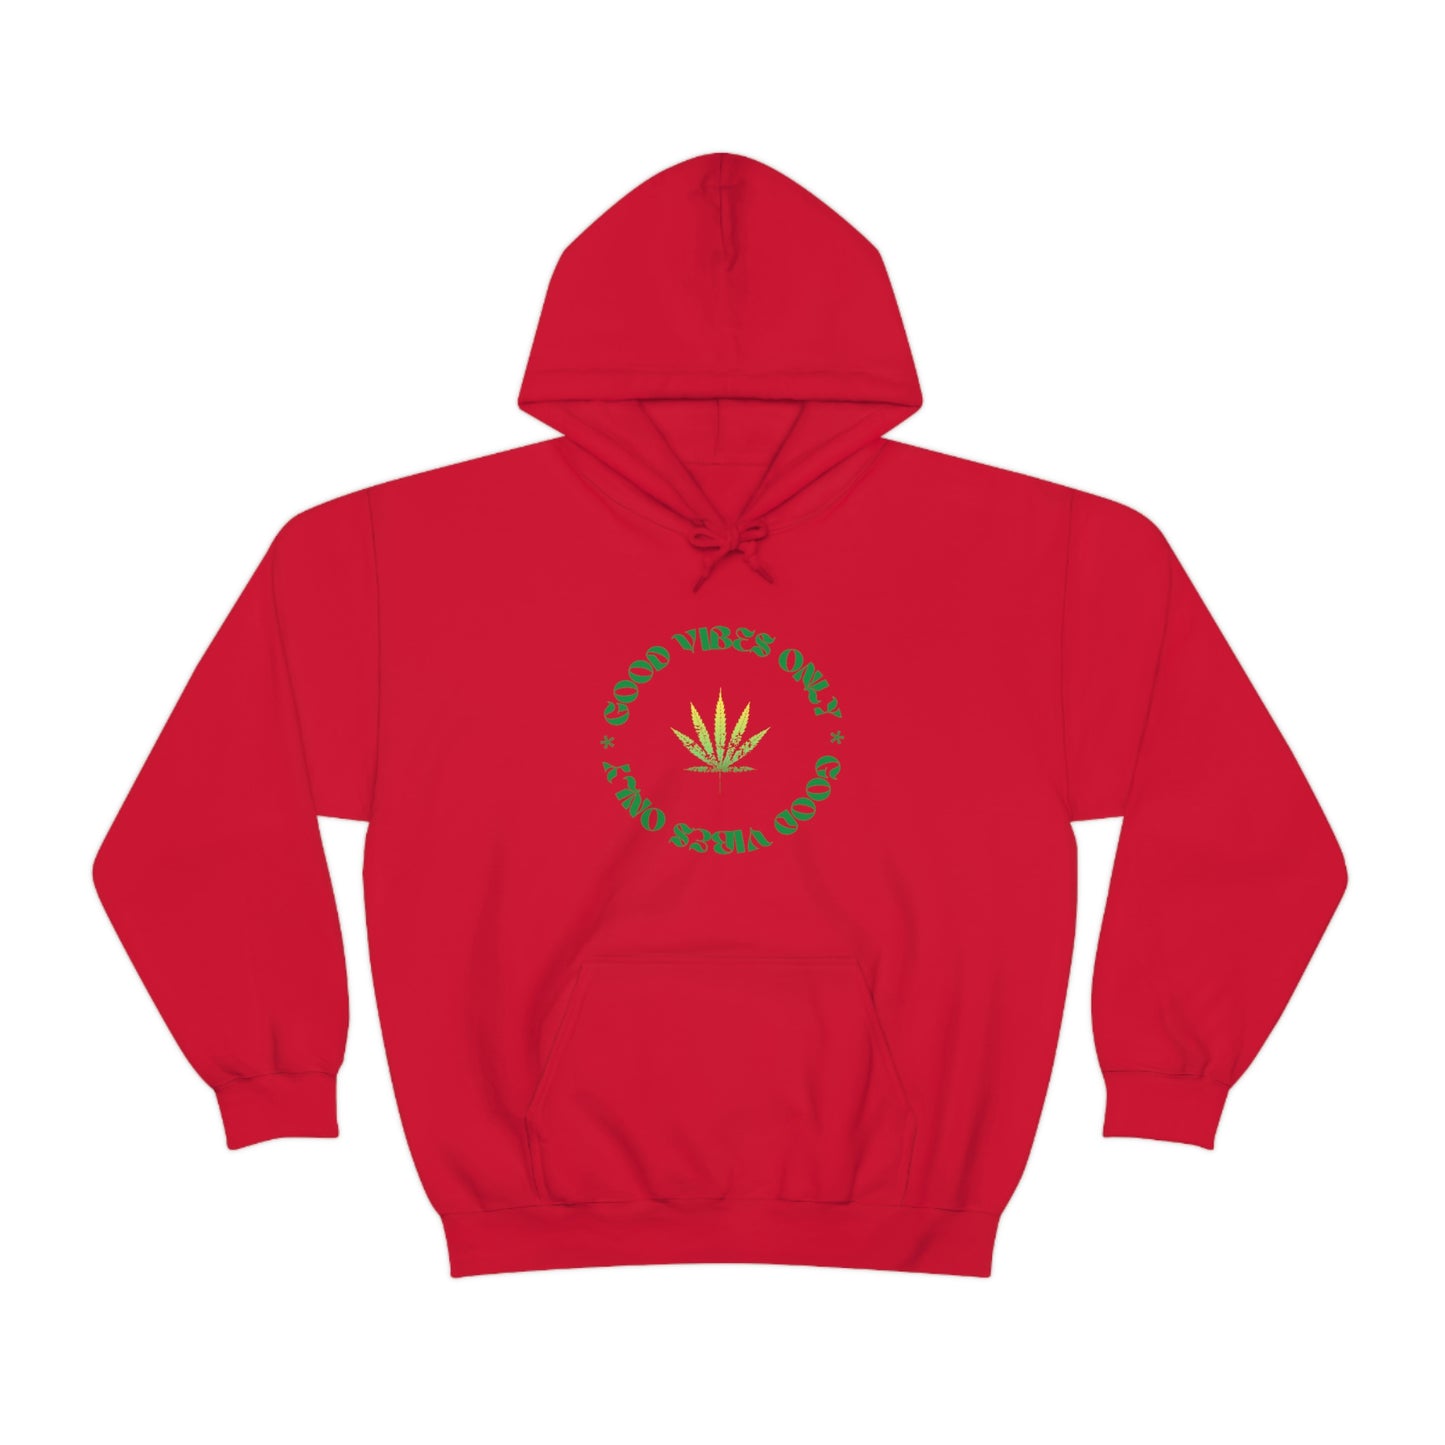 A red Good Vibes Only Weed Sweater.